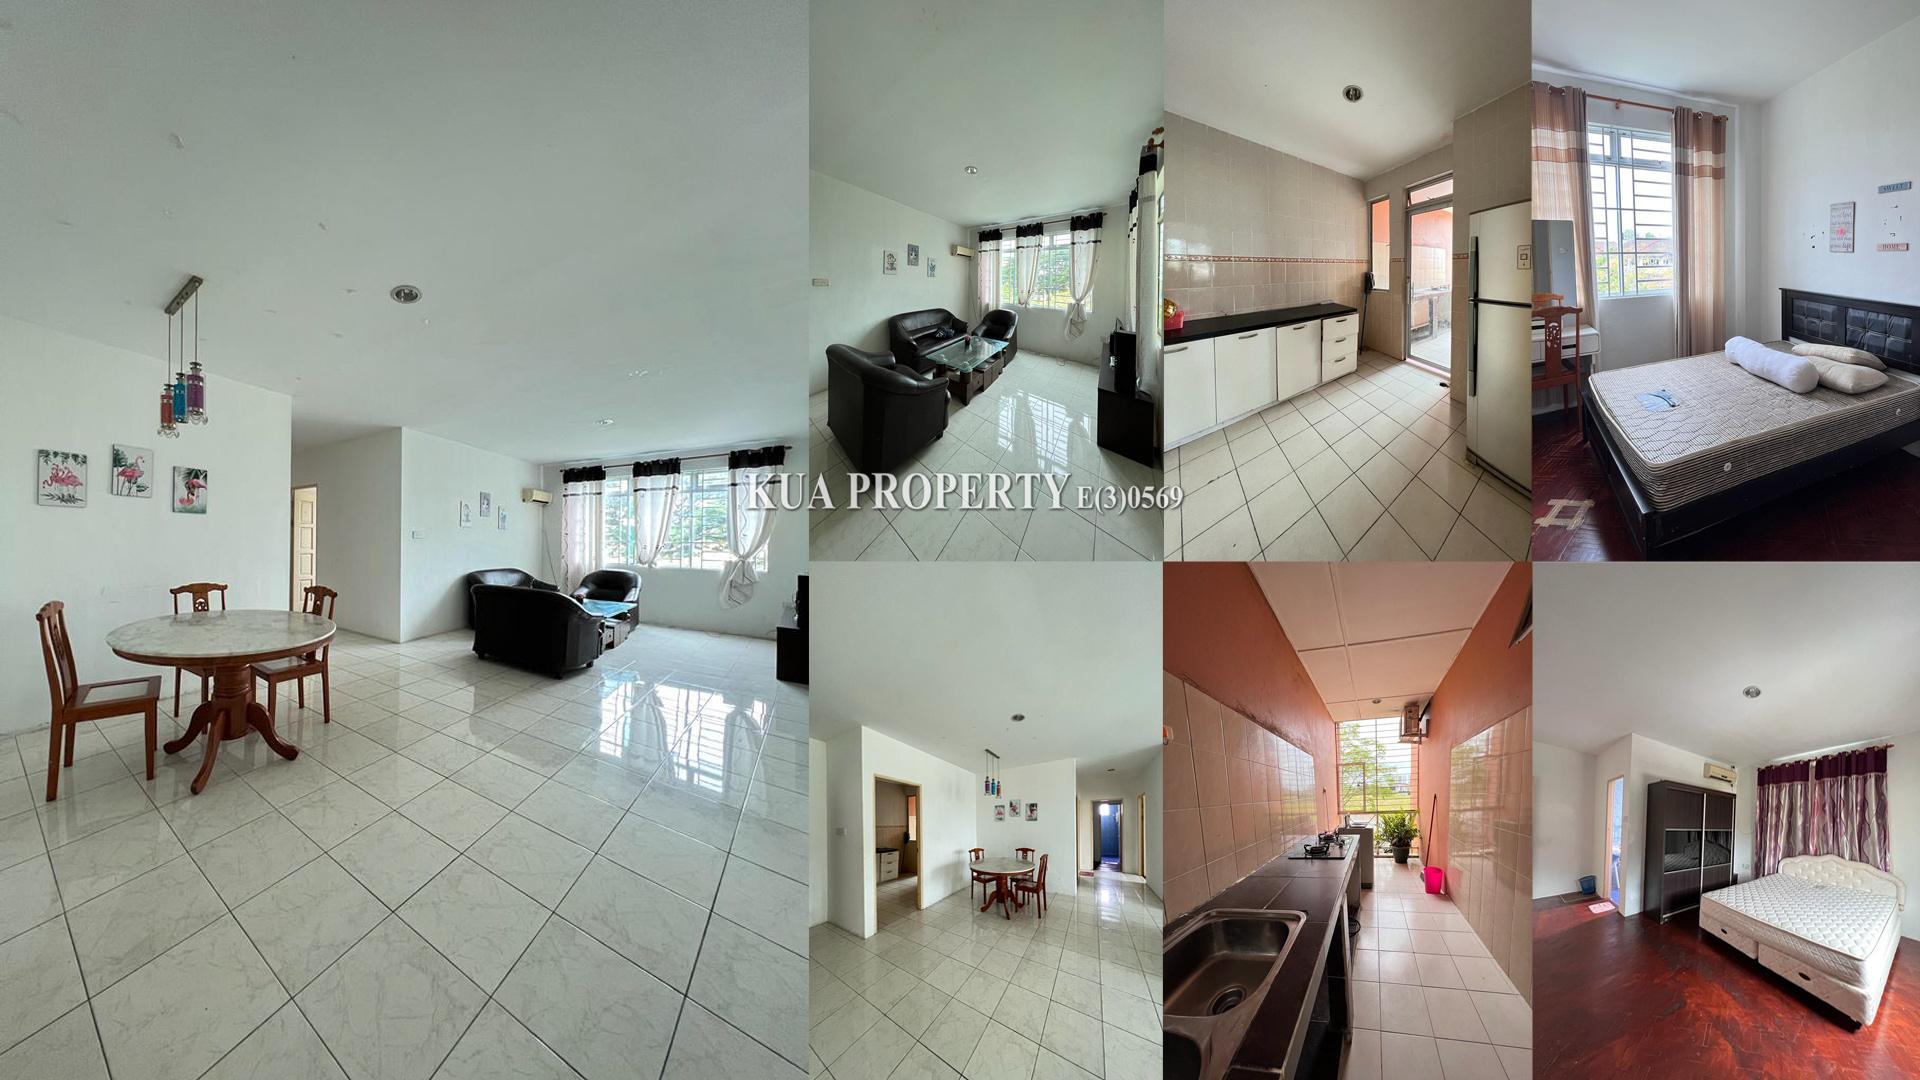 Eden Heights Condominium For Rent! at Richmond Hill, Airport Road